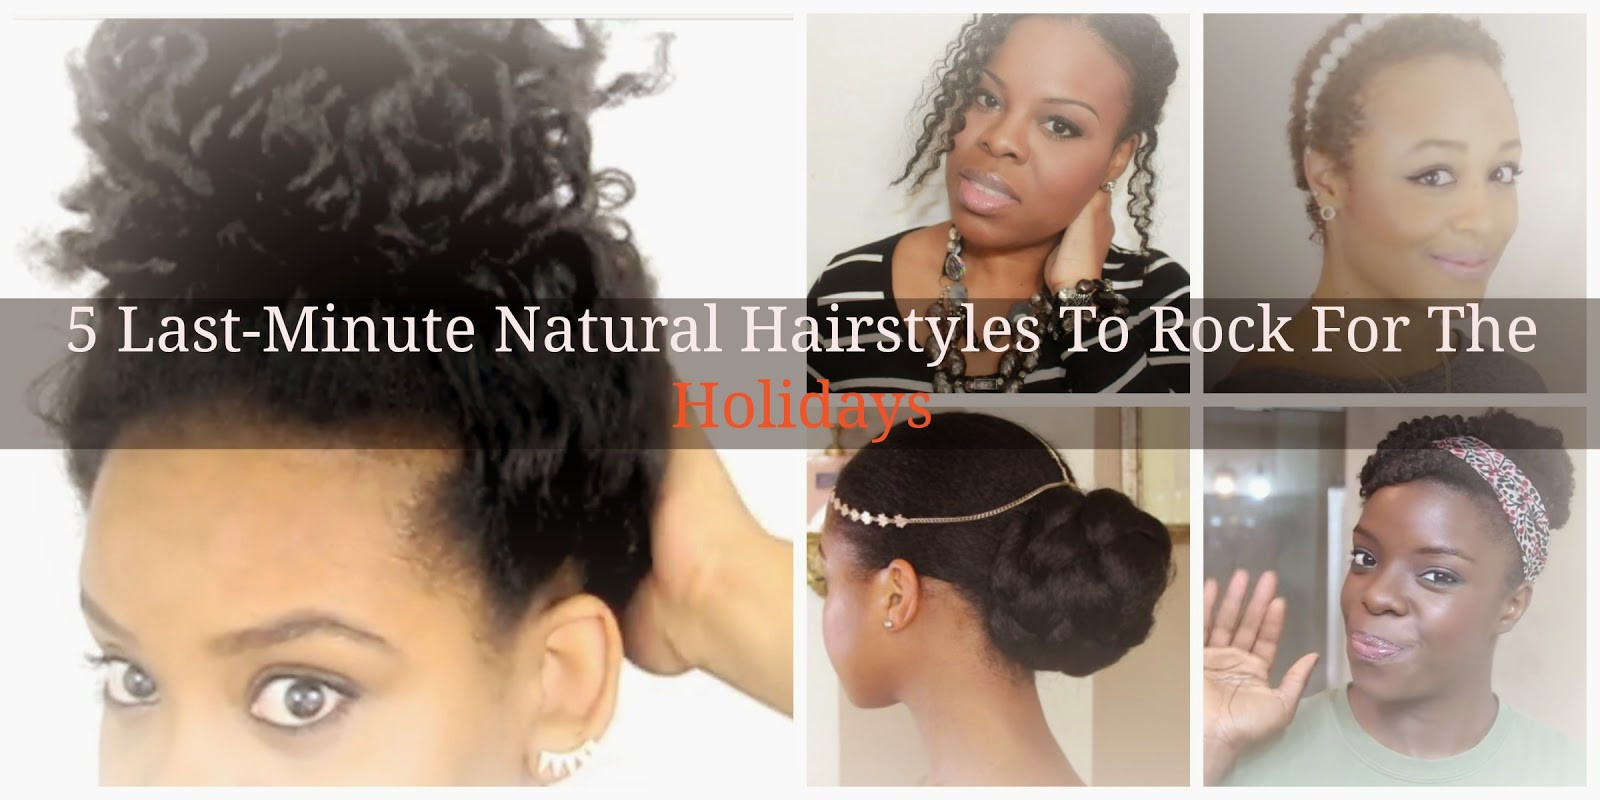 Natural Hairstyles That Last
 5 Last Minute Natural Hairstyles To Rock For The Holidays